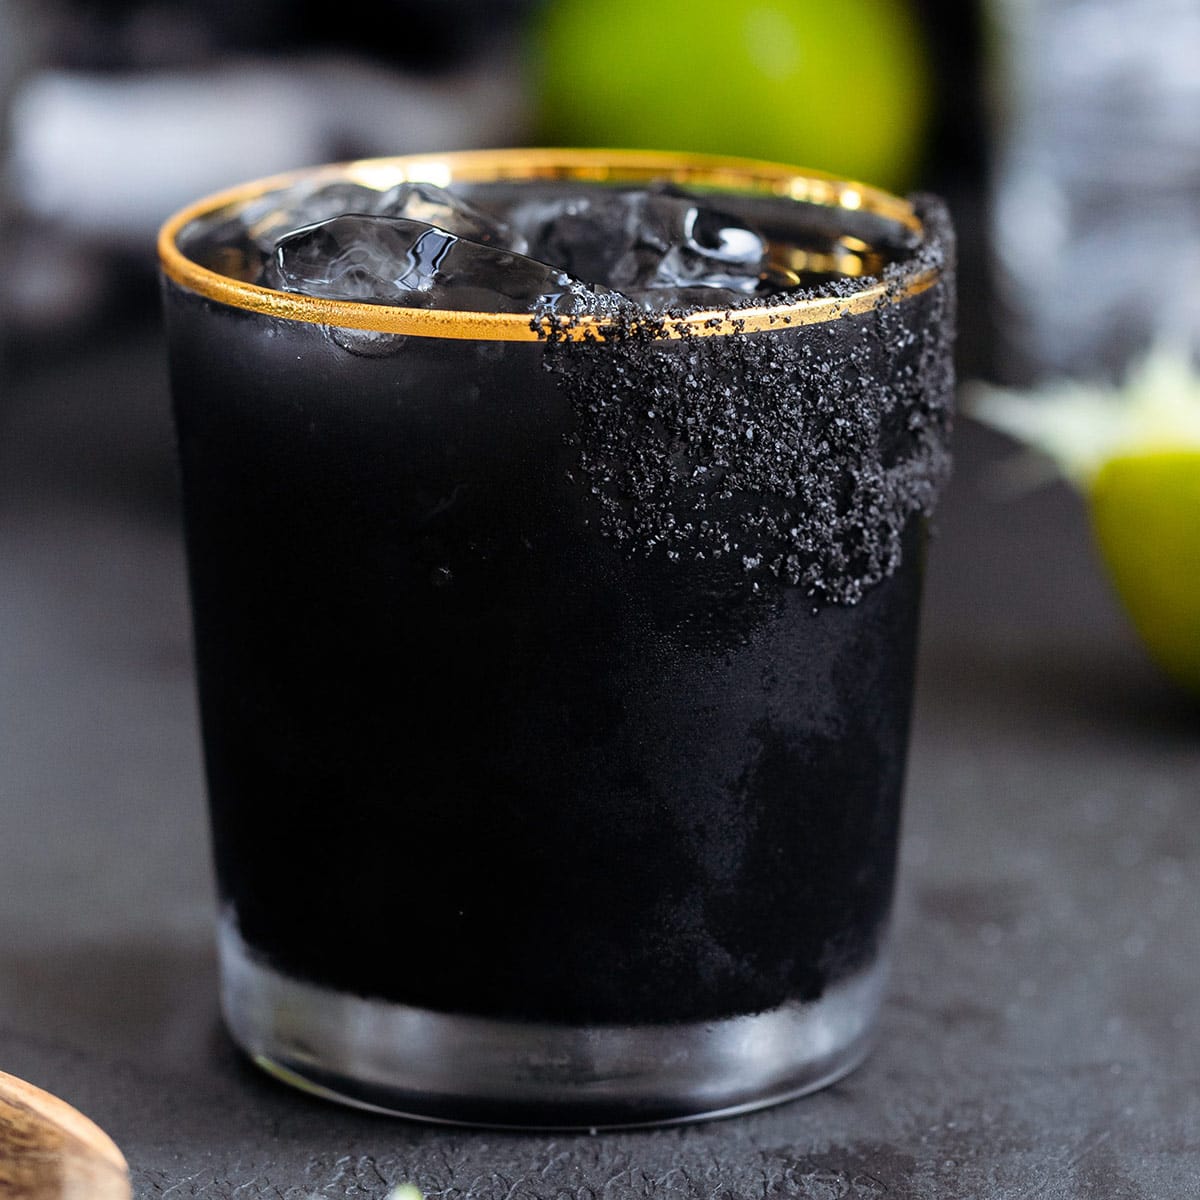 Black margarita with black salt rim on a black background with limes in the background.